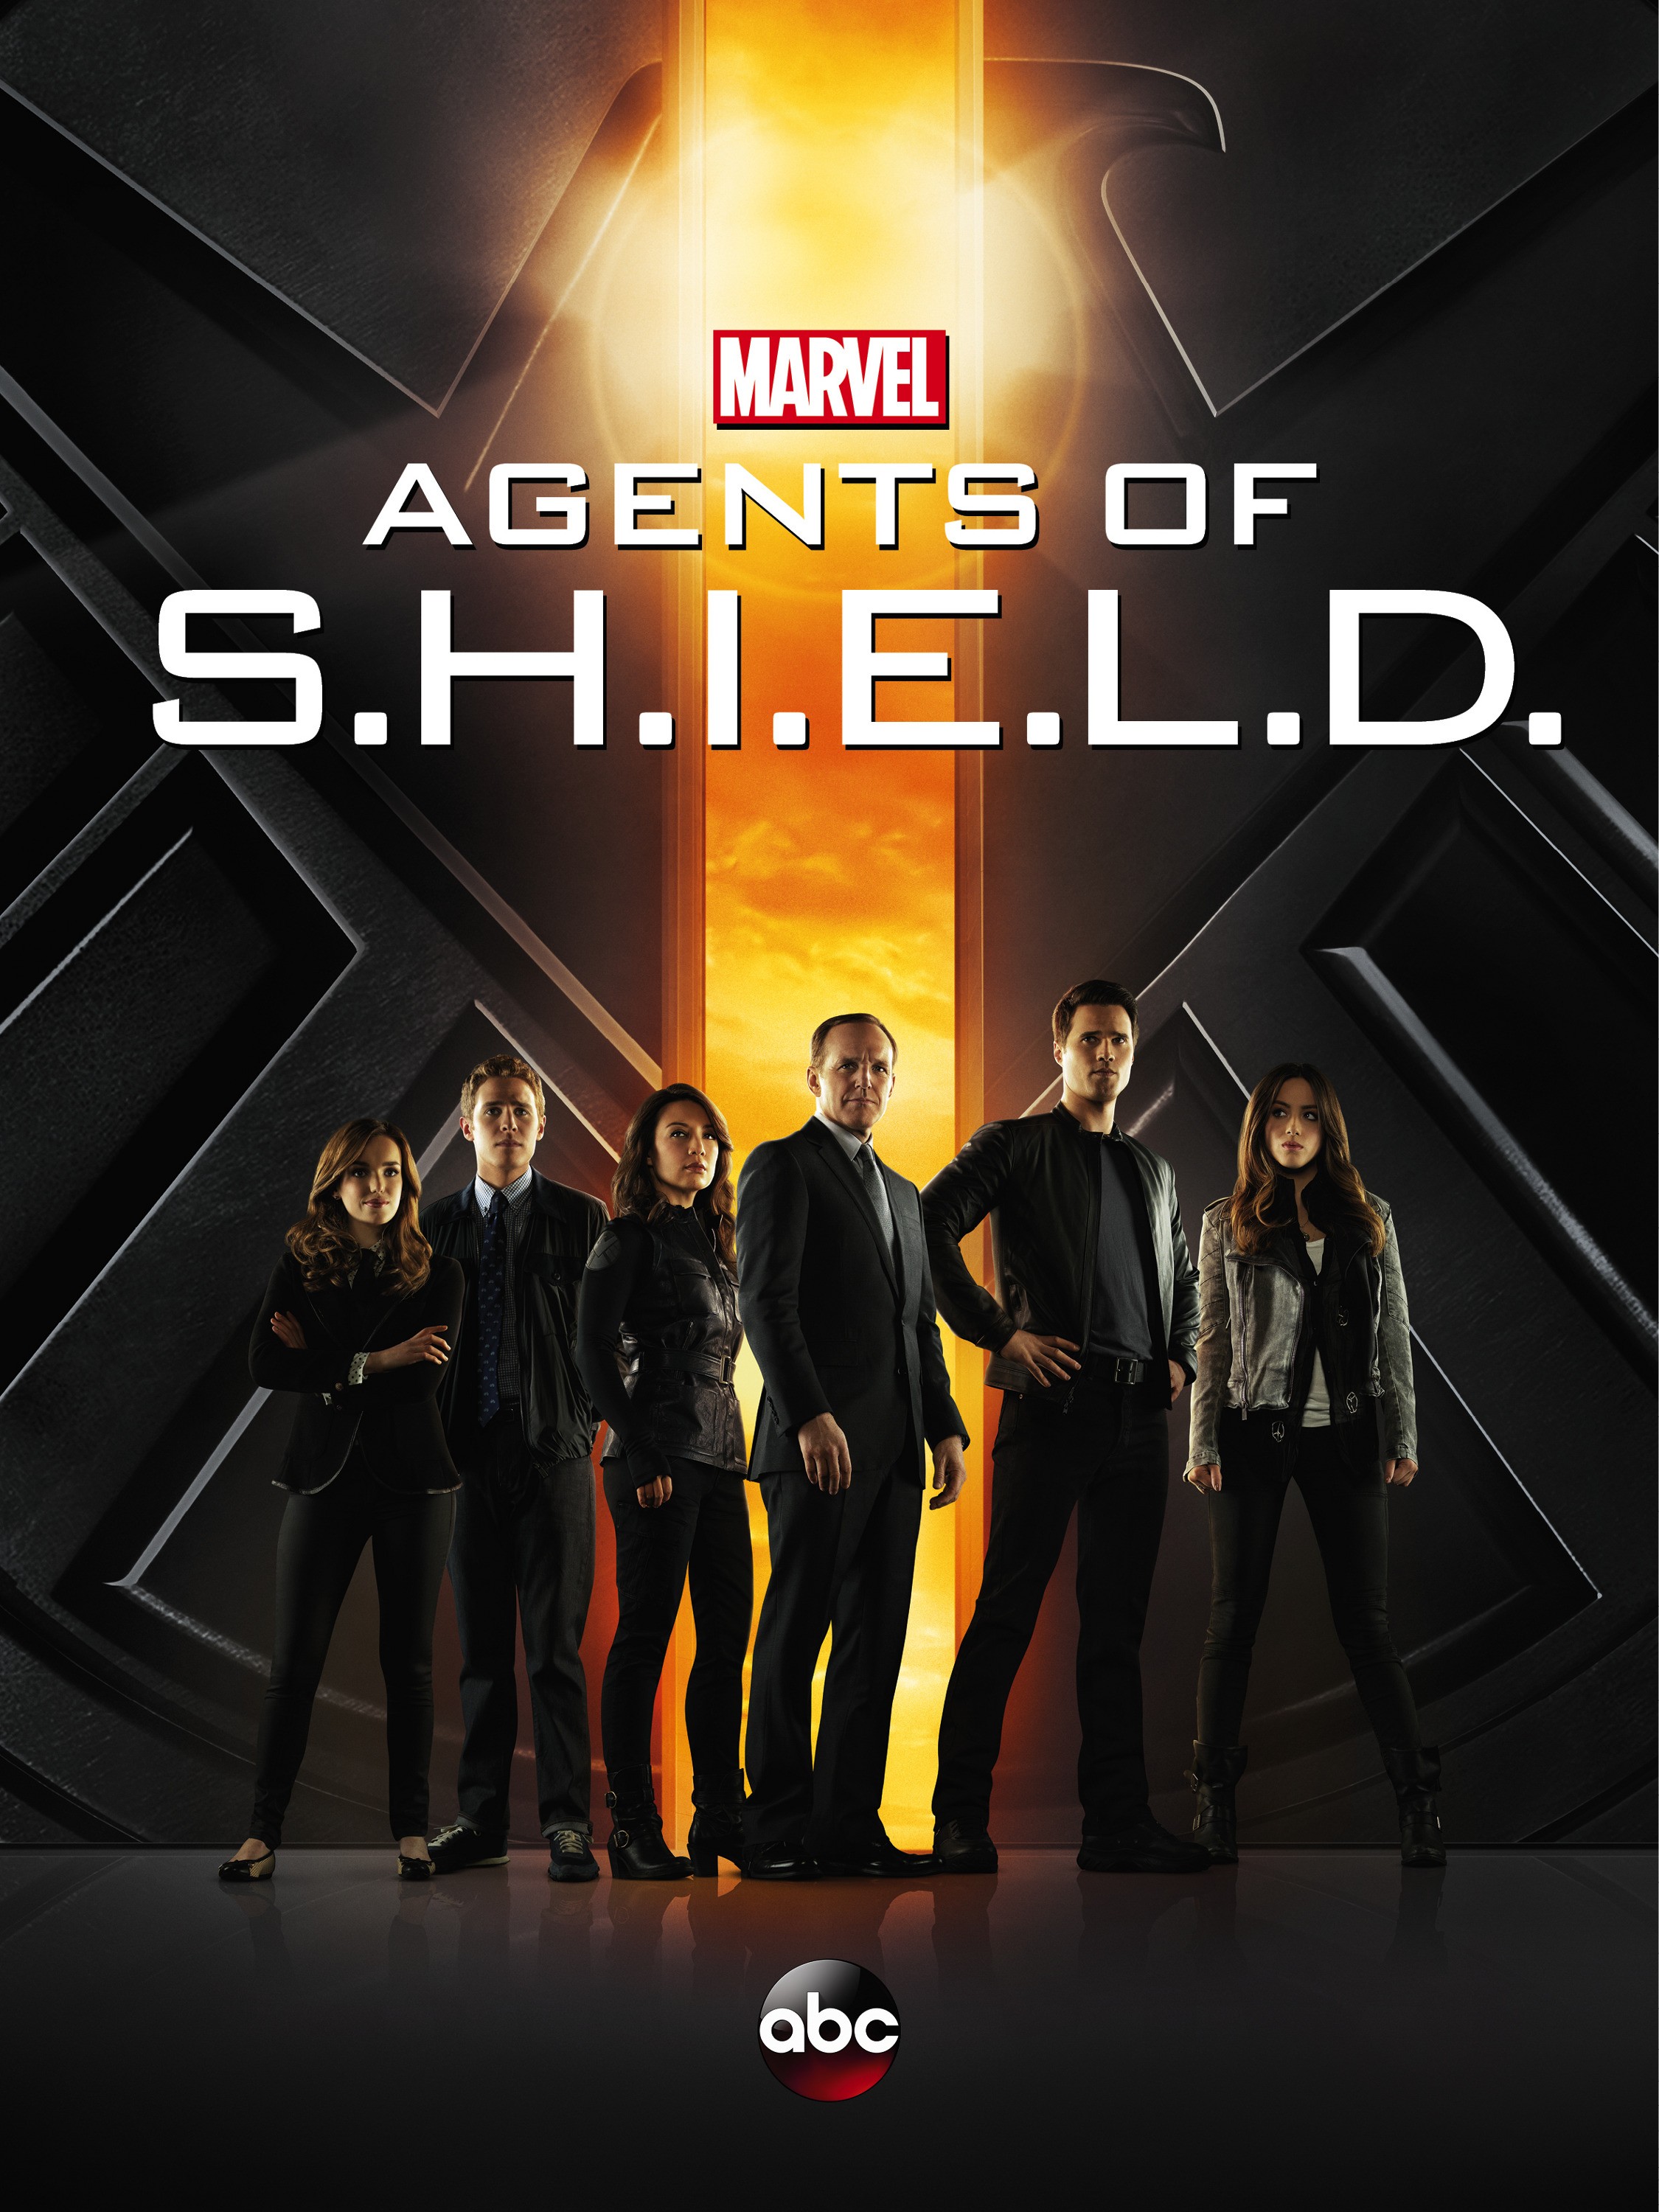 Agents of shield itunes